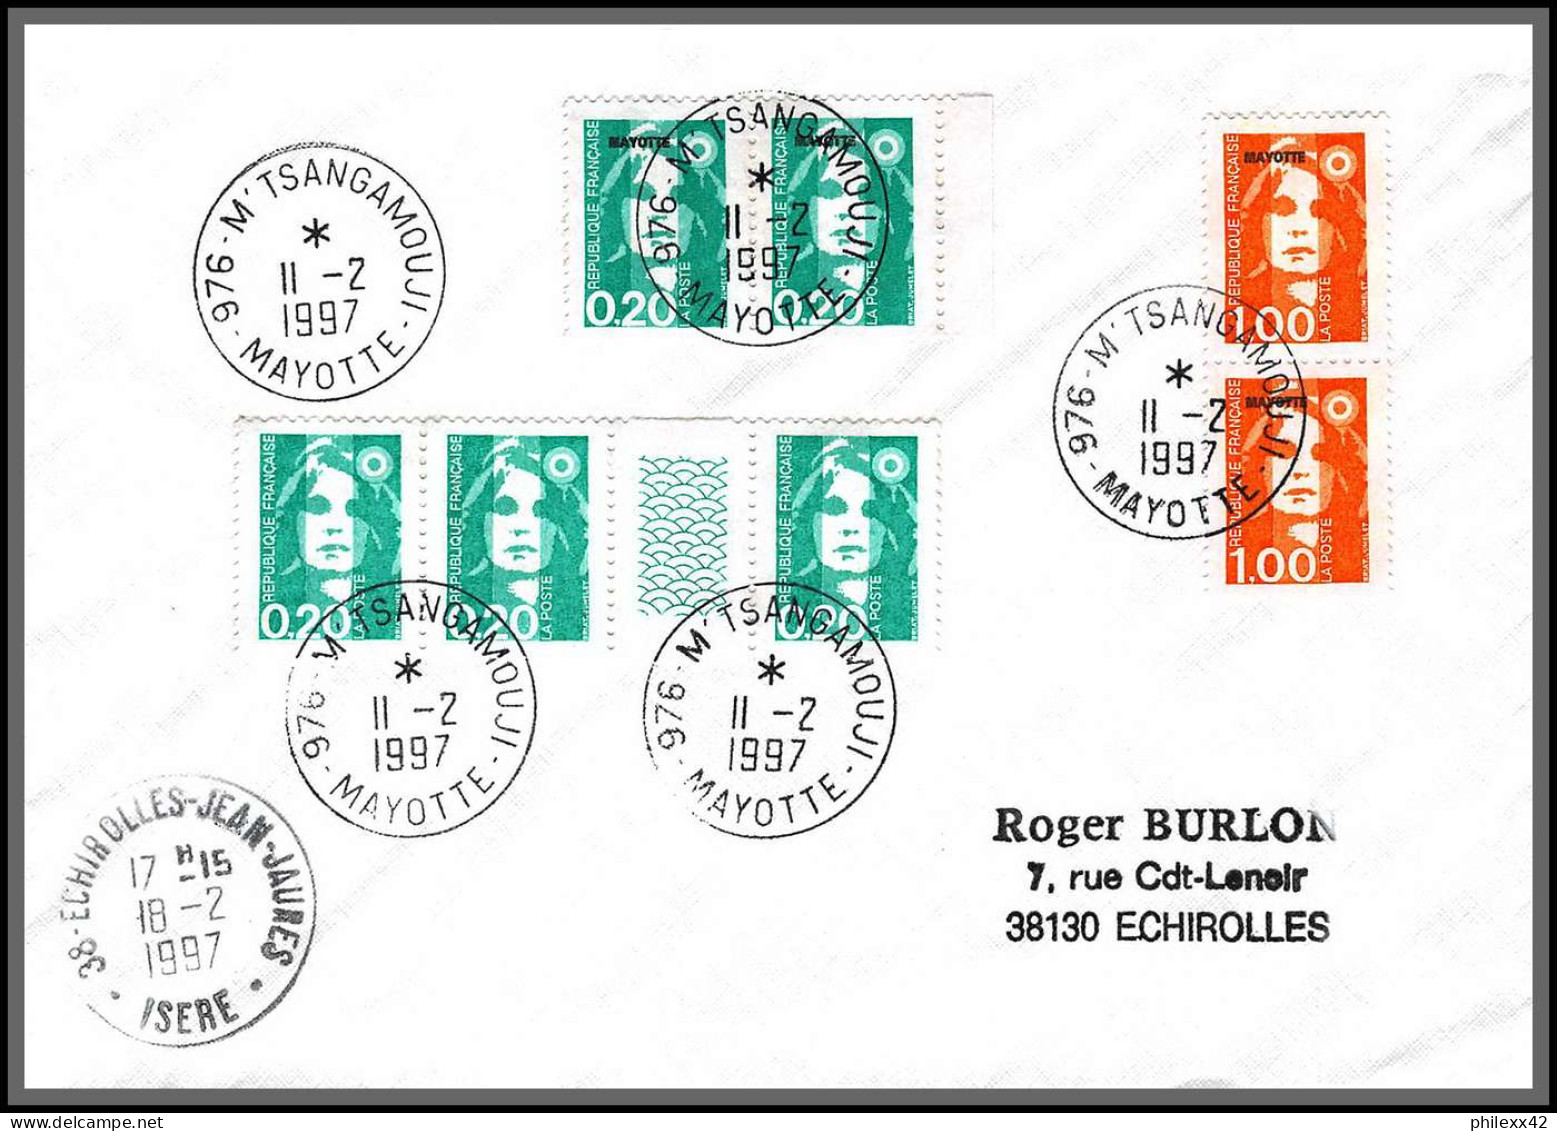 74144 Mixte Marianne Bicentenaire 11/2/1997 M'tsangamouji Mayotte Echirolles Isère Lettre Cover Colonies  - Covers & Documents